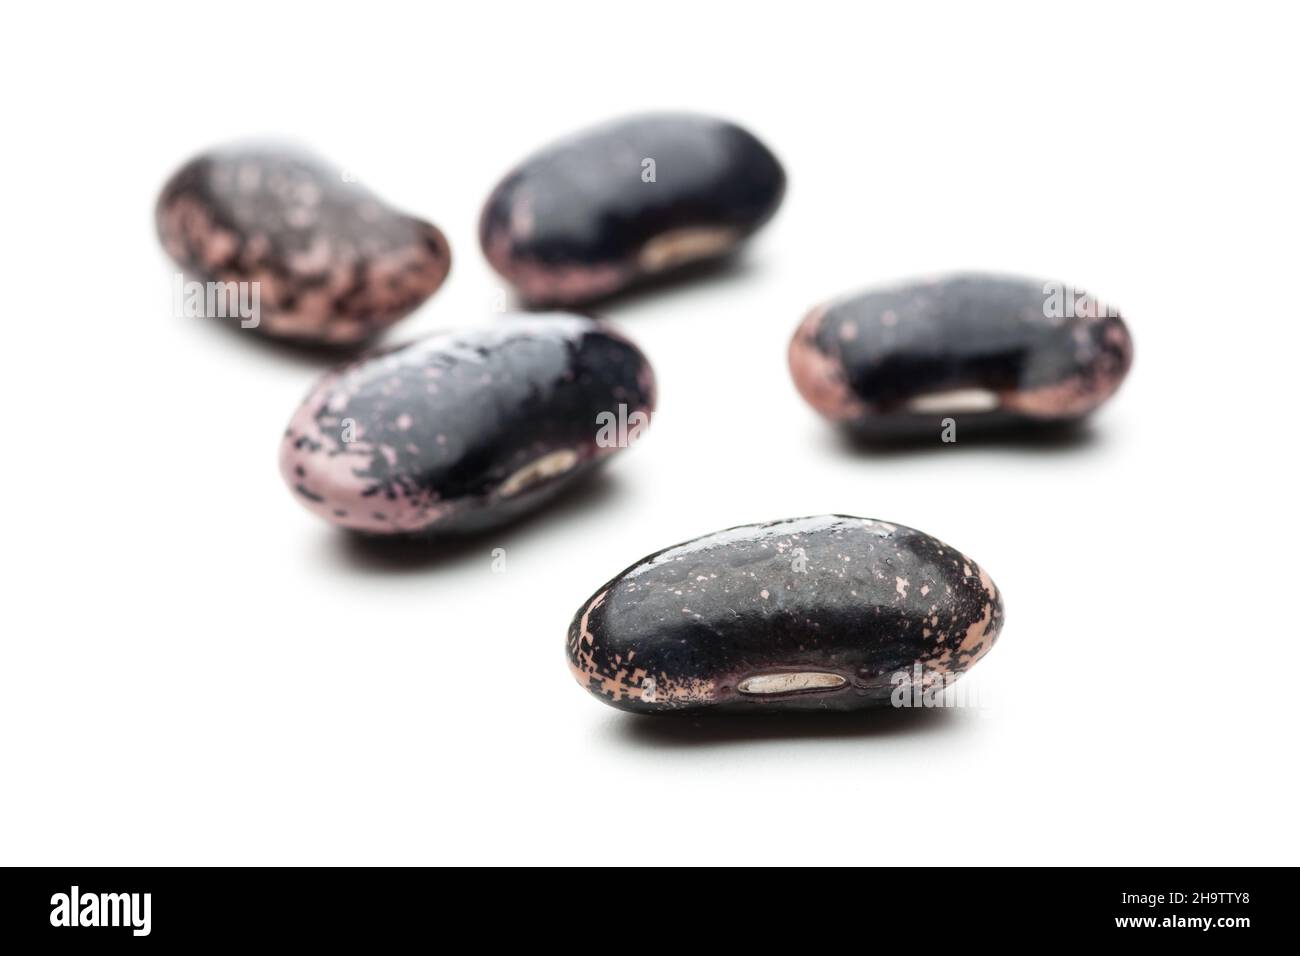 bean, beans, dark, white, background, horizontal, scarlet runner beans, shell, patterns, foods, carbohydrates, Styria, detail, details, close-up, shin Stock Photo